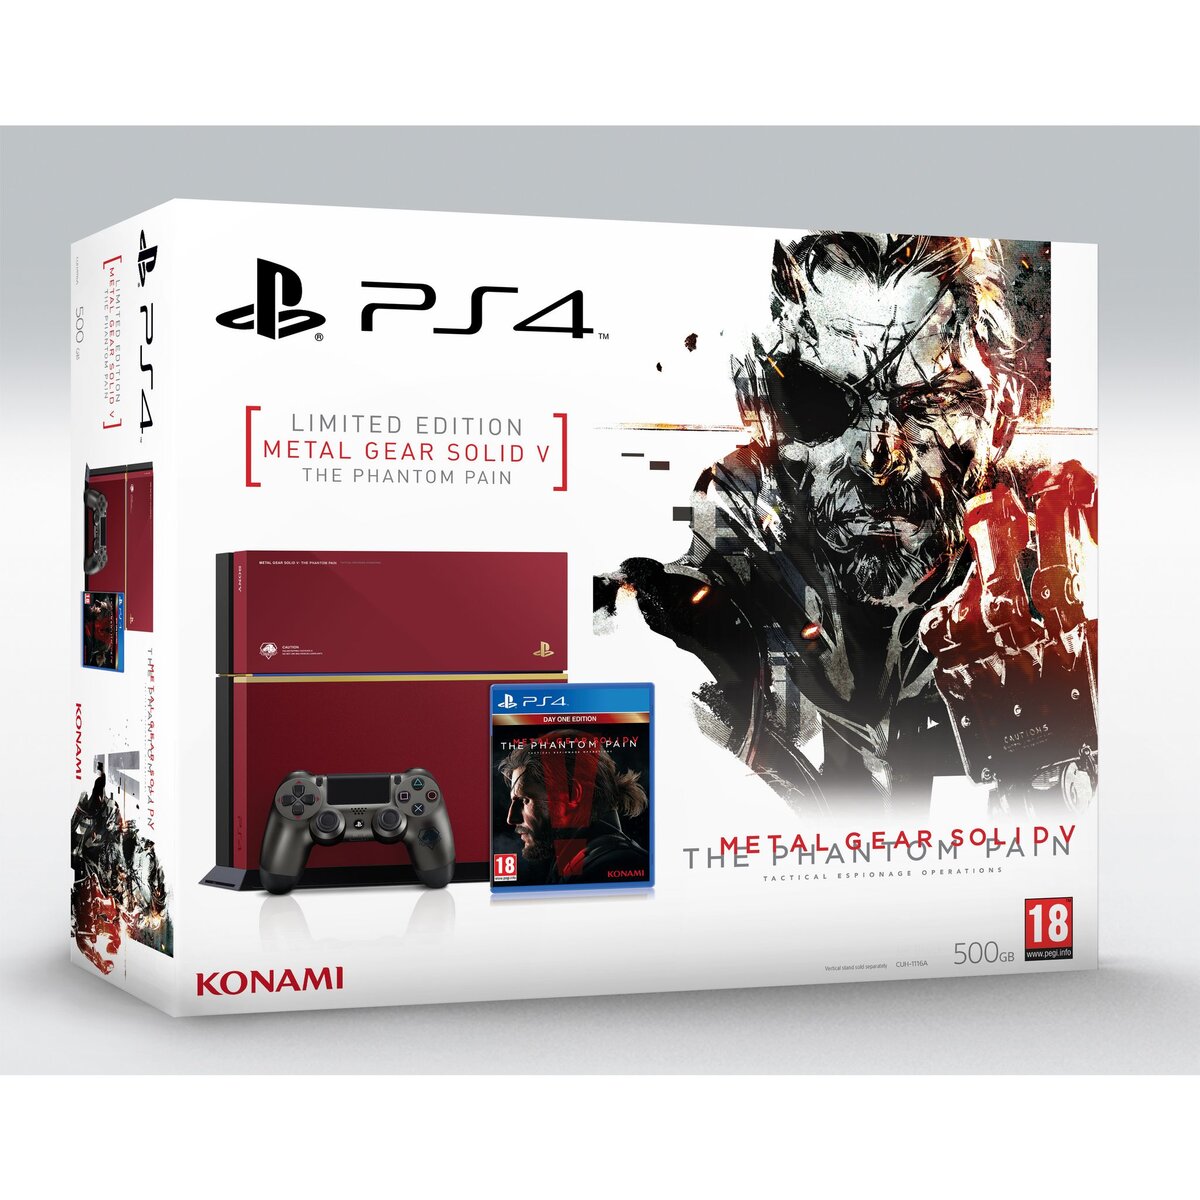 Console PS4 Metal Gear Solid V : The Phantom Pain - Edition Limitée